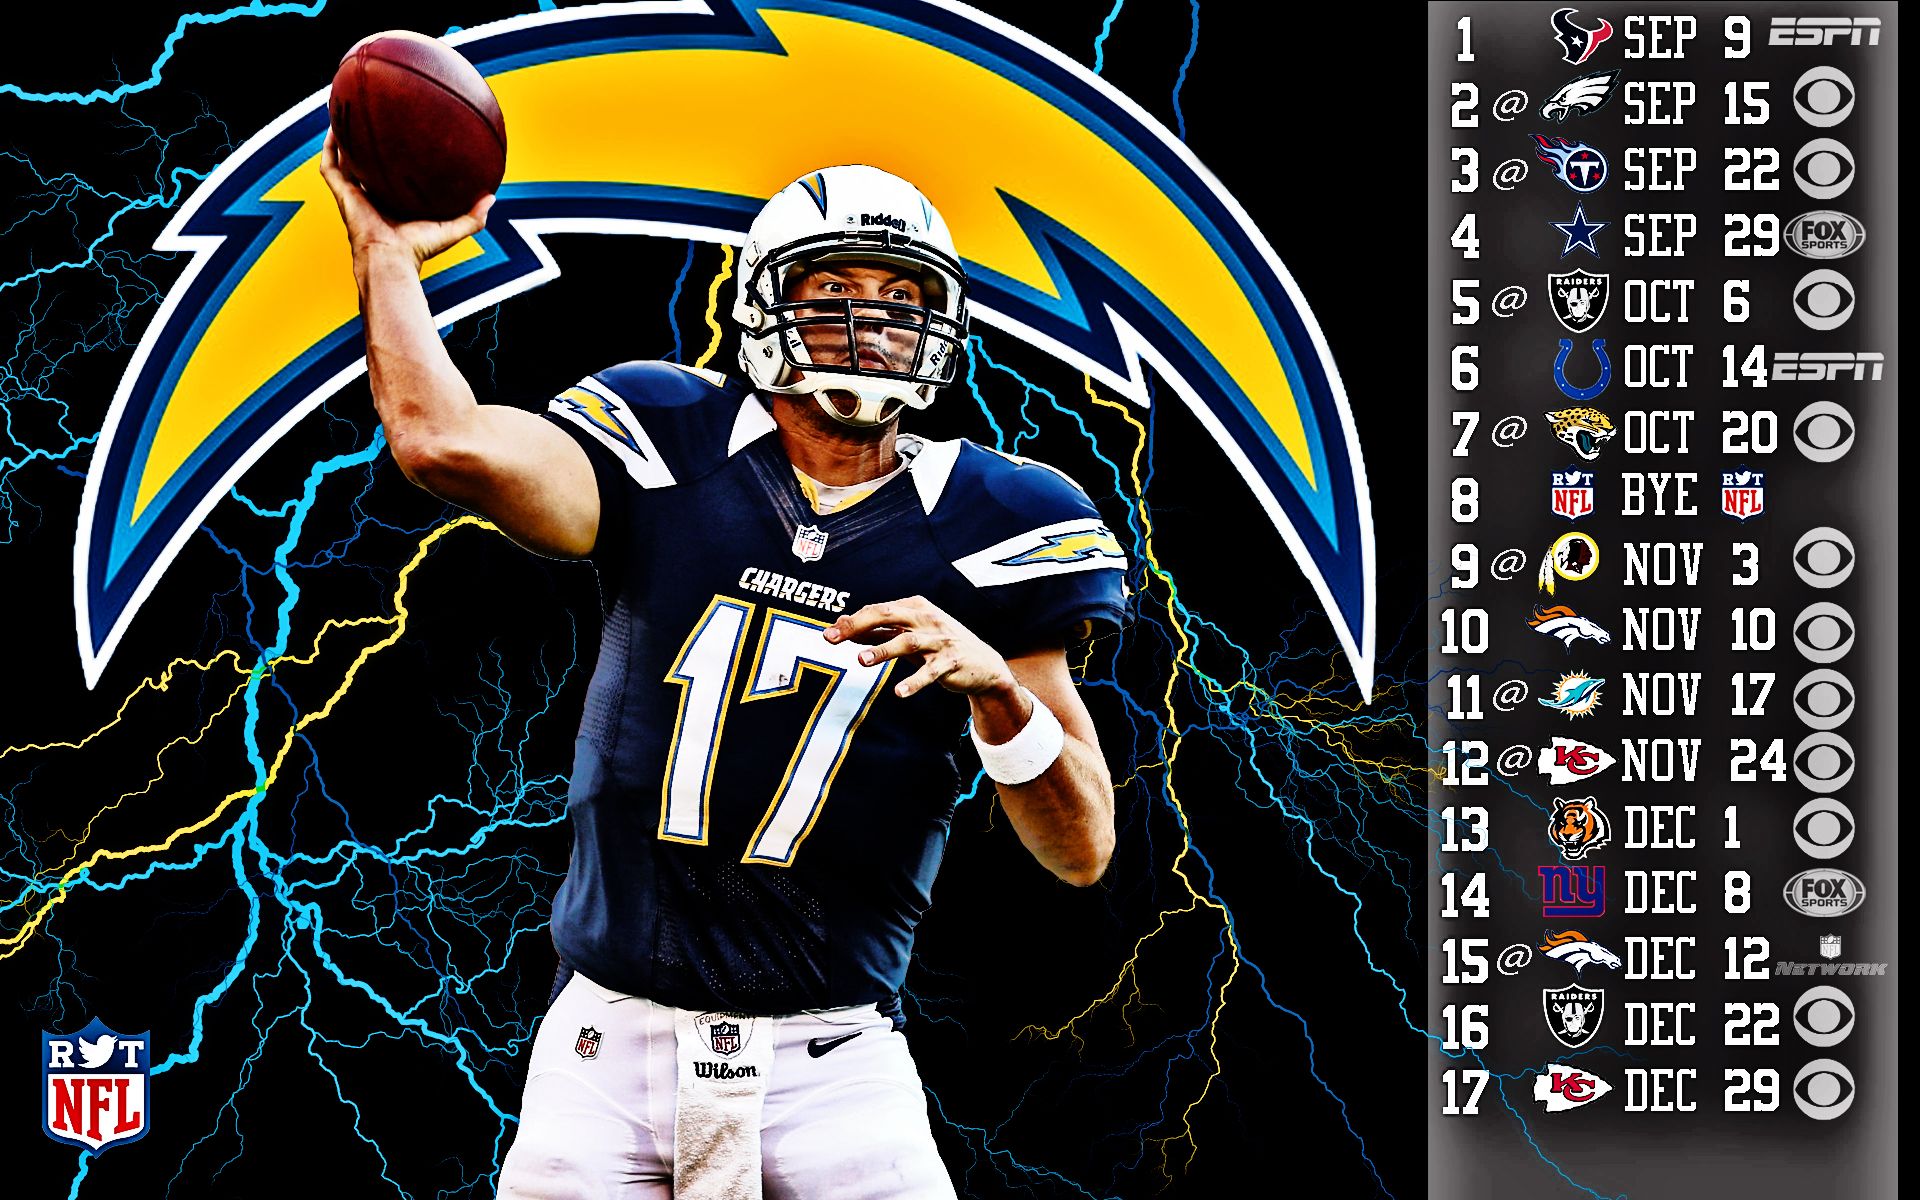 SAN DIEGO CHARGERS nfl football fo wallpaper 4800x3200 158045